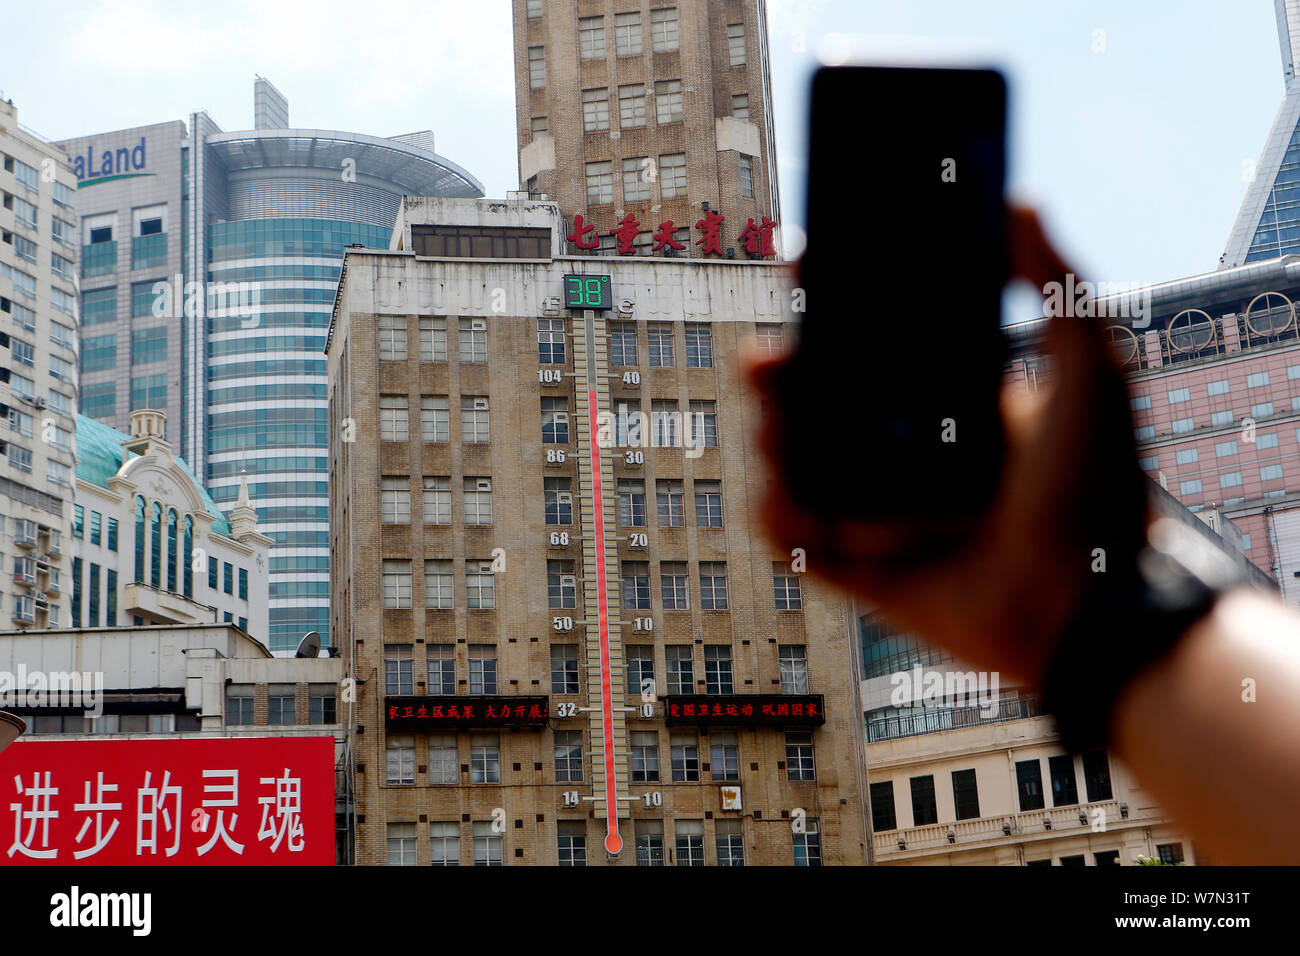 A huge thermometer on a building shows the current temperature reaching 38 degrees Celsius on a scorching day in Shanghai, China, 12 July 2017. Stock Photo